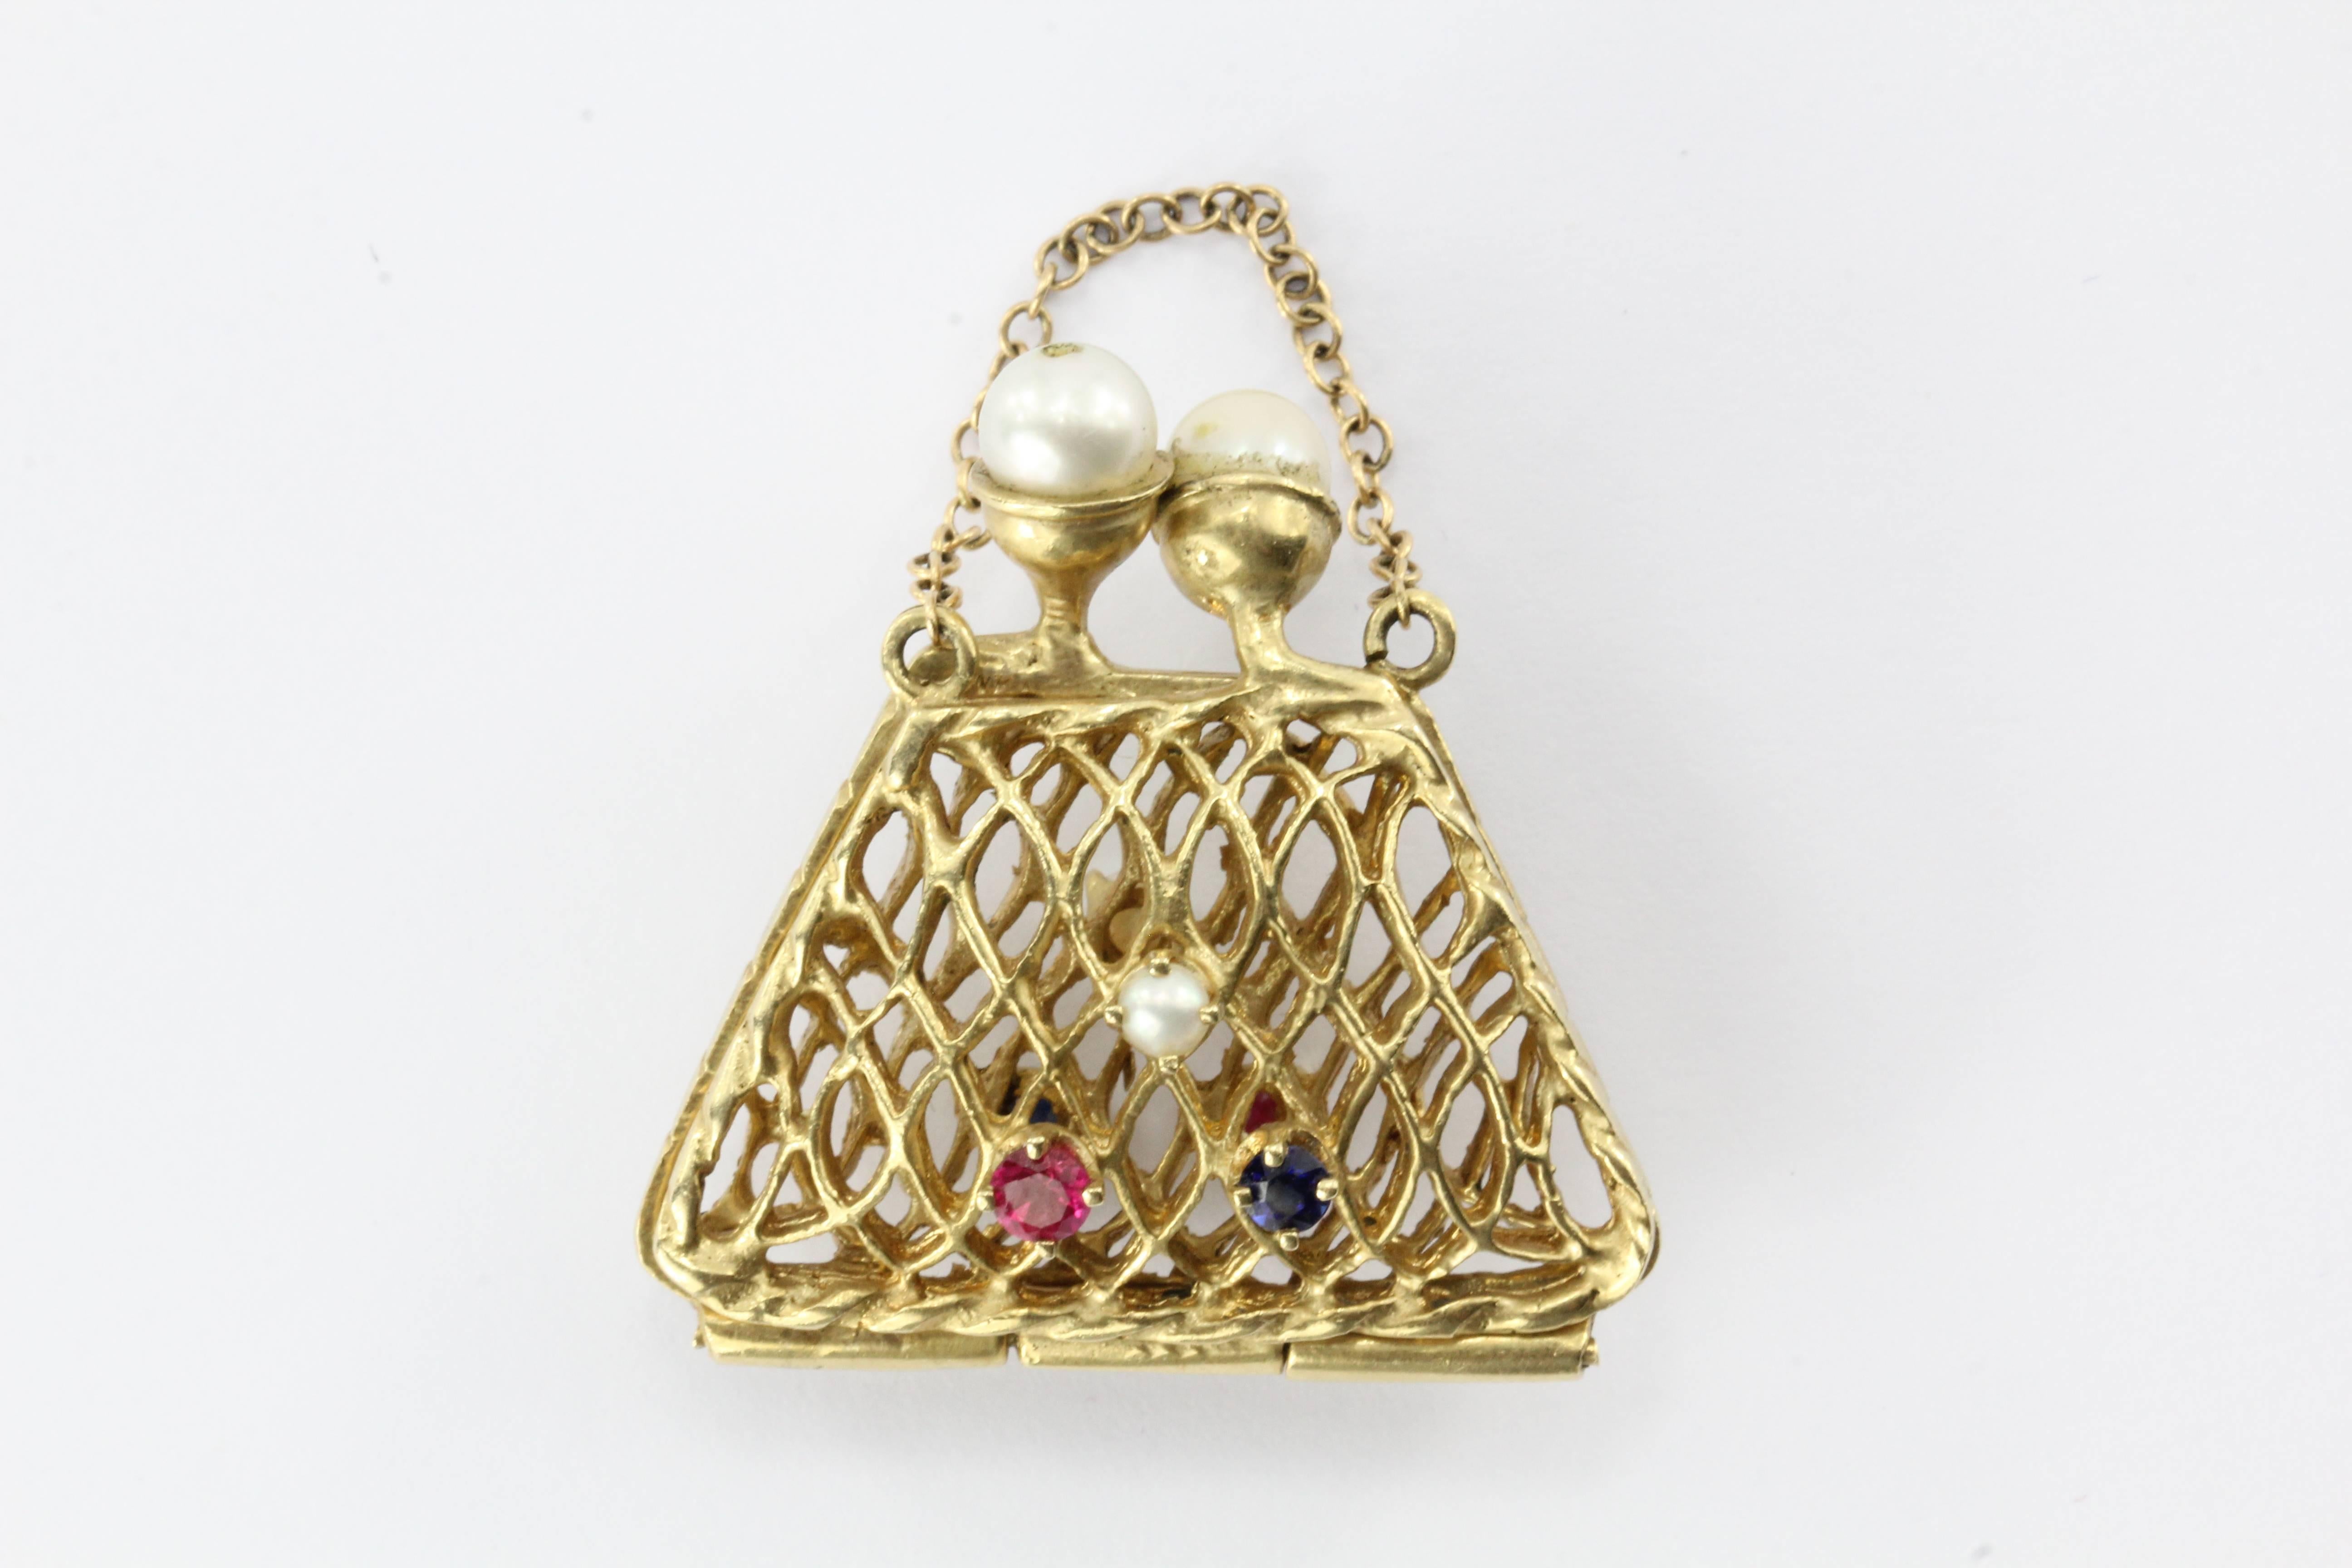 14K Gold Woven Sapphire, Ruby, & Pearl Opening Purse Pendant / Charm. The piece is in great estate condition and ready to wear. One of the pearls on the clasp is a replacement. The piece is signed 14K. The piece measures 1.25